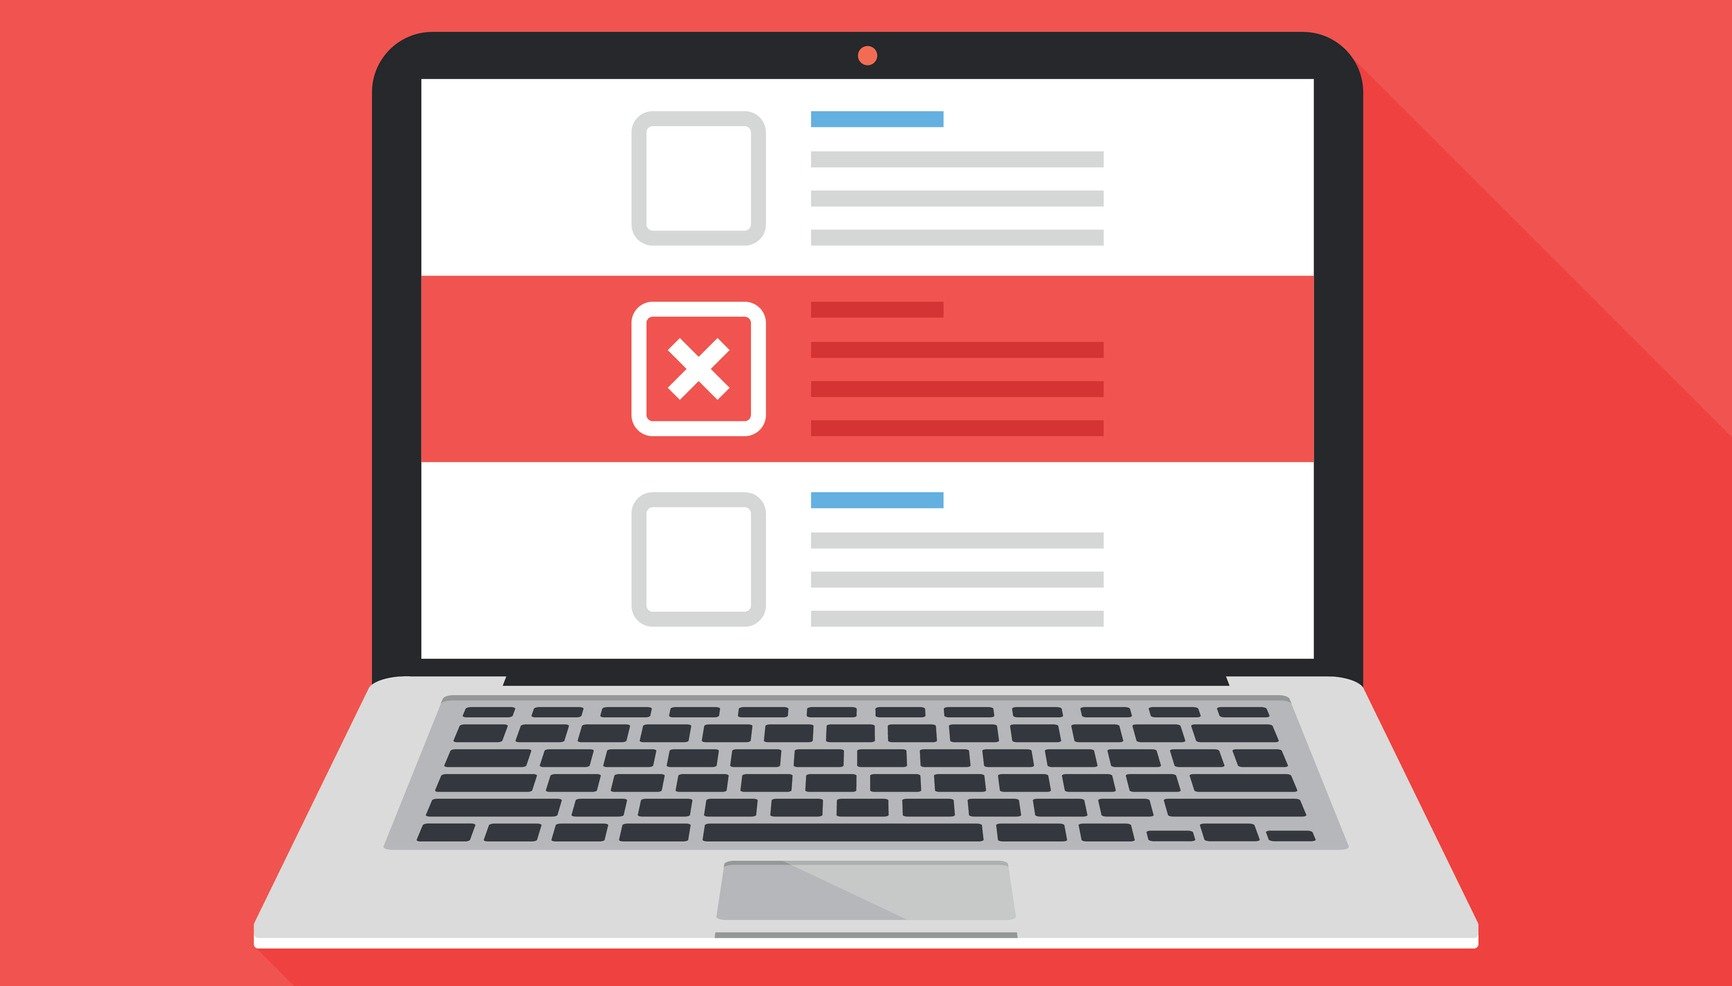 4 Common Website Mistakes and How to Fix Them